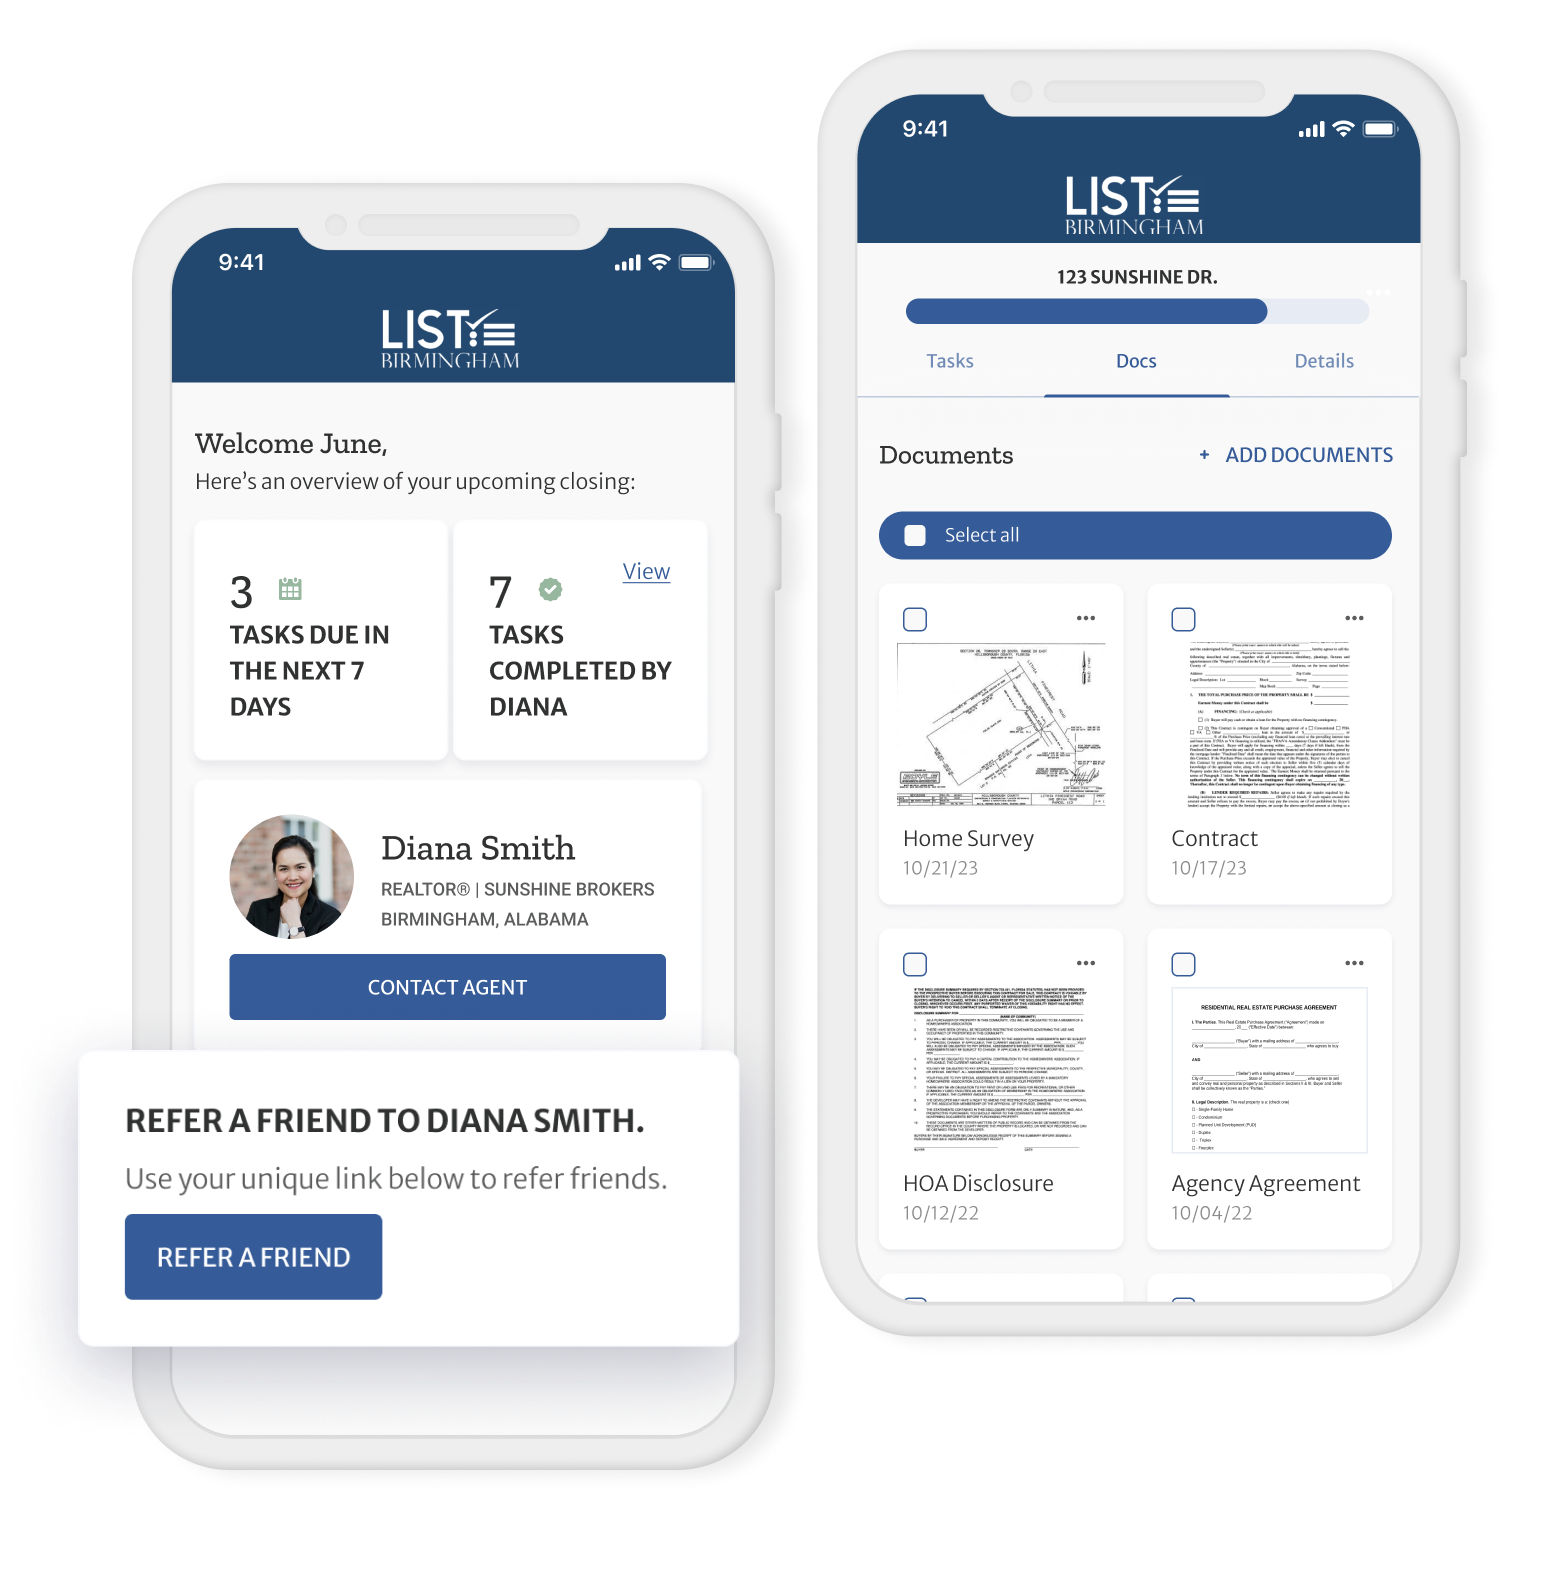 ListedKit's innovative client portal improves client experience and satisfaction